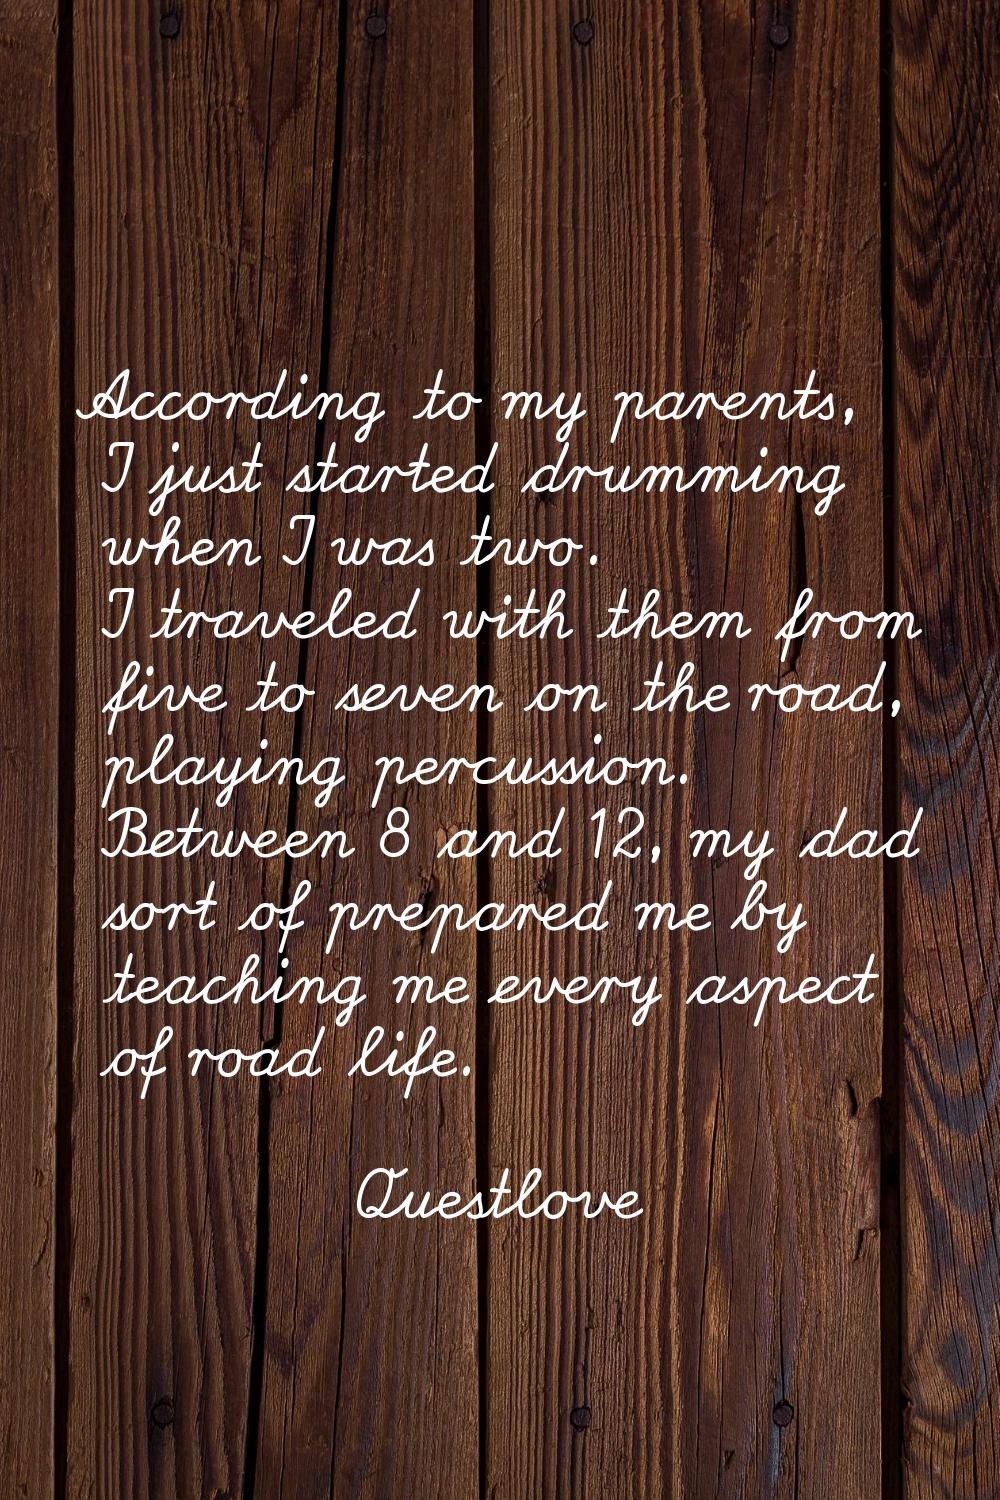 According to my parents, I just started drumming when I was two. I traveled with them from five to 